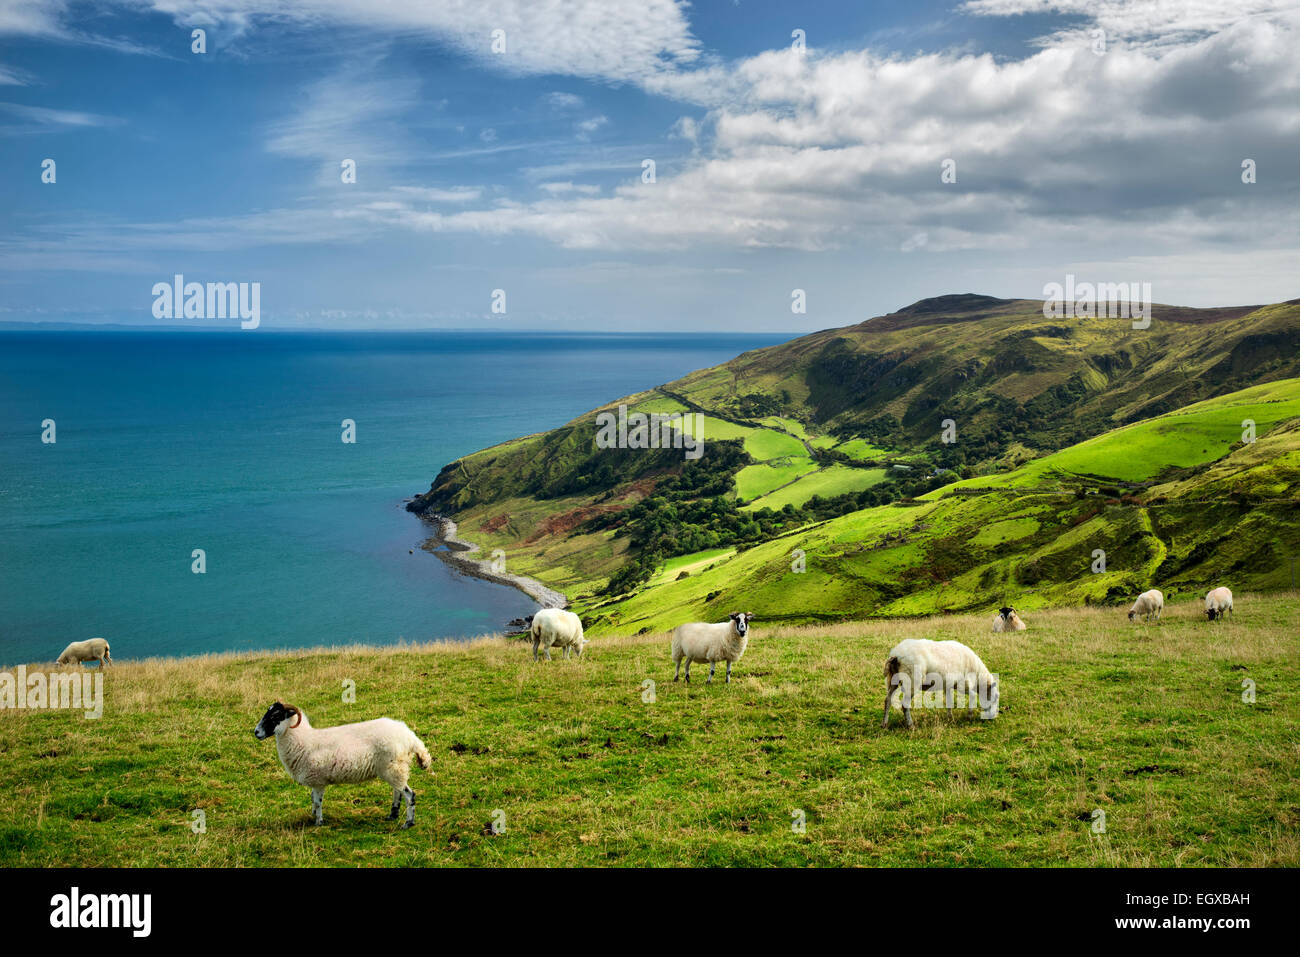 View from Torr Head with sheep grazing. Antrim Coast, Northern Ireland Stock Photo